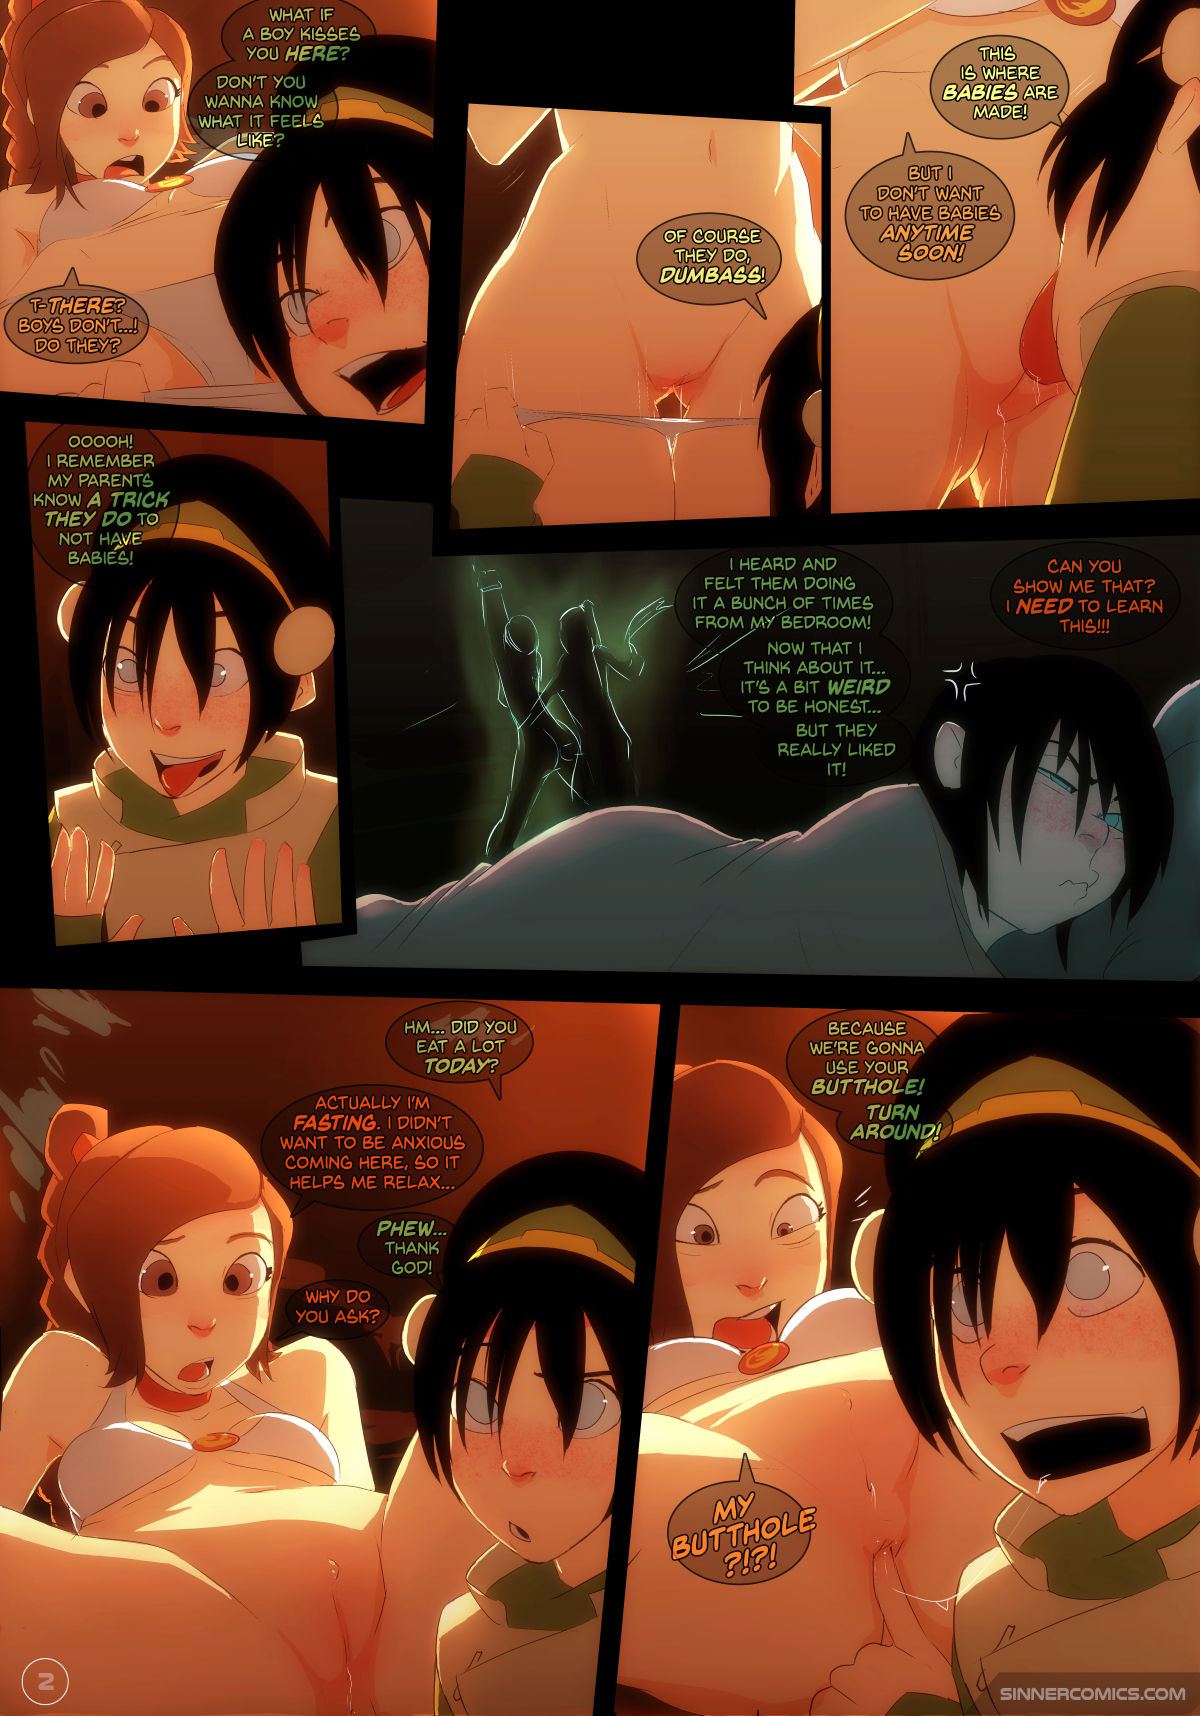 SILLYGIRL - TOPH VS TY LEE FROM AVATAR THE LAST AIRBENDER